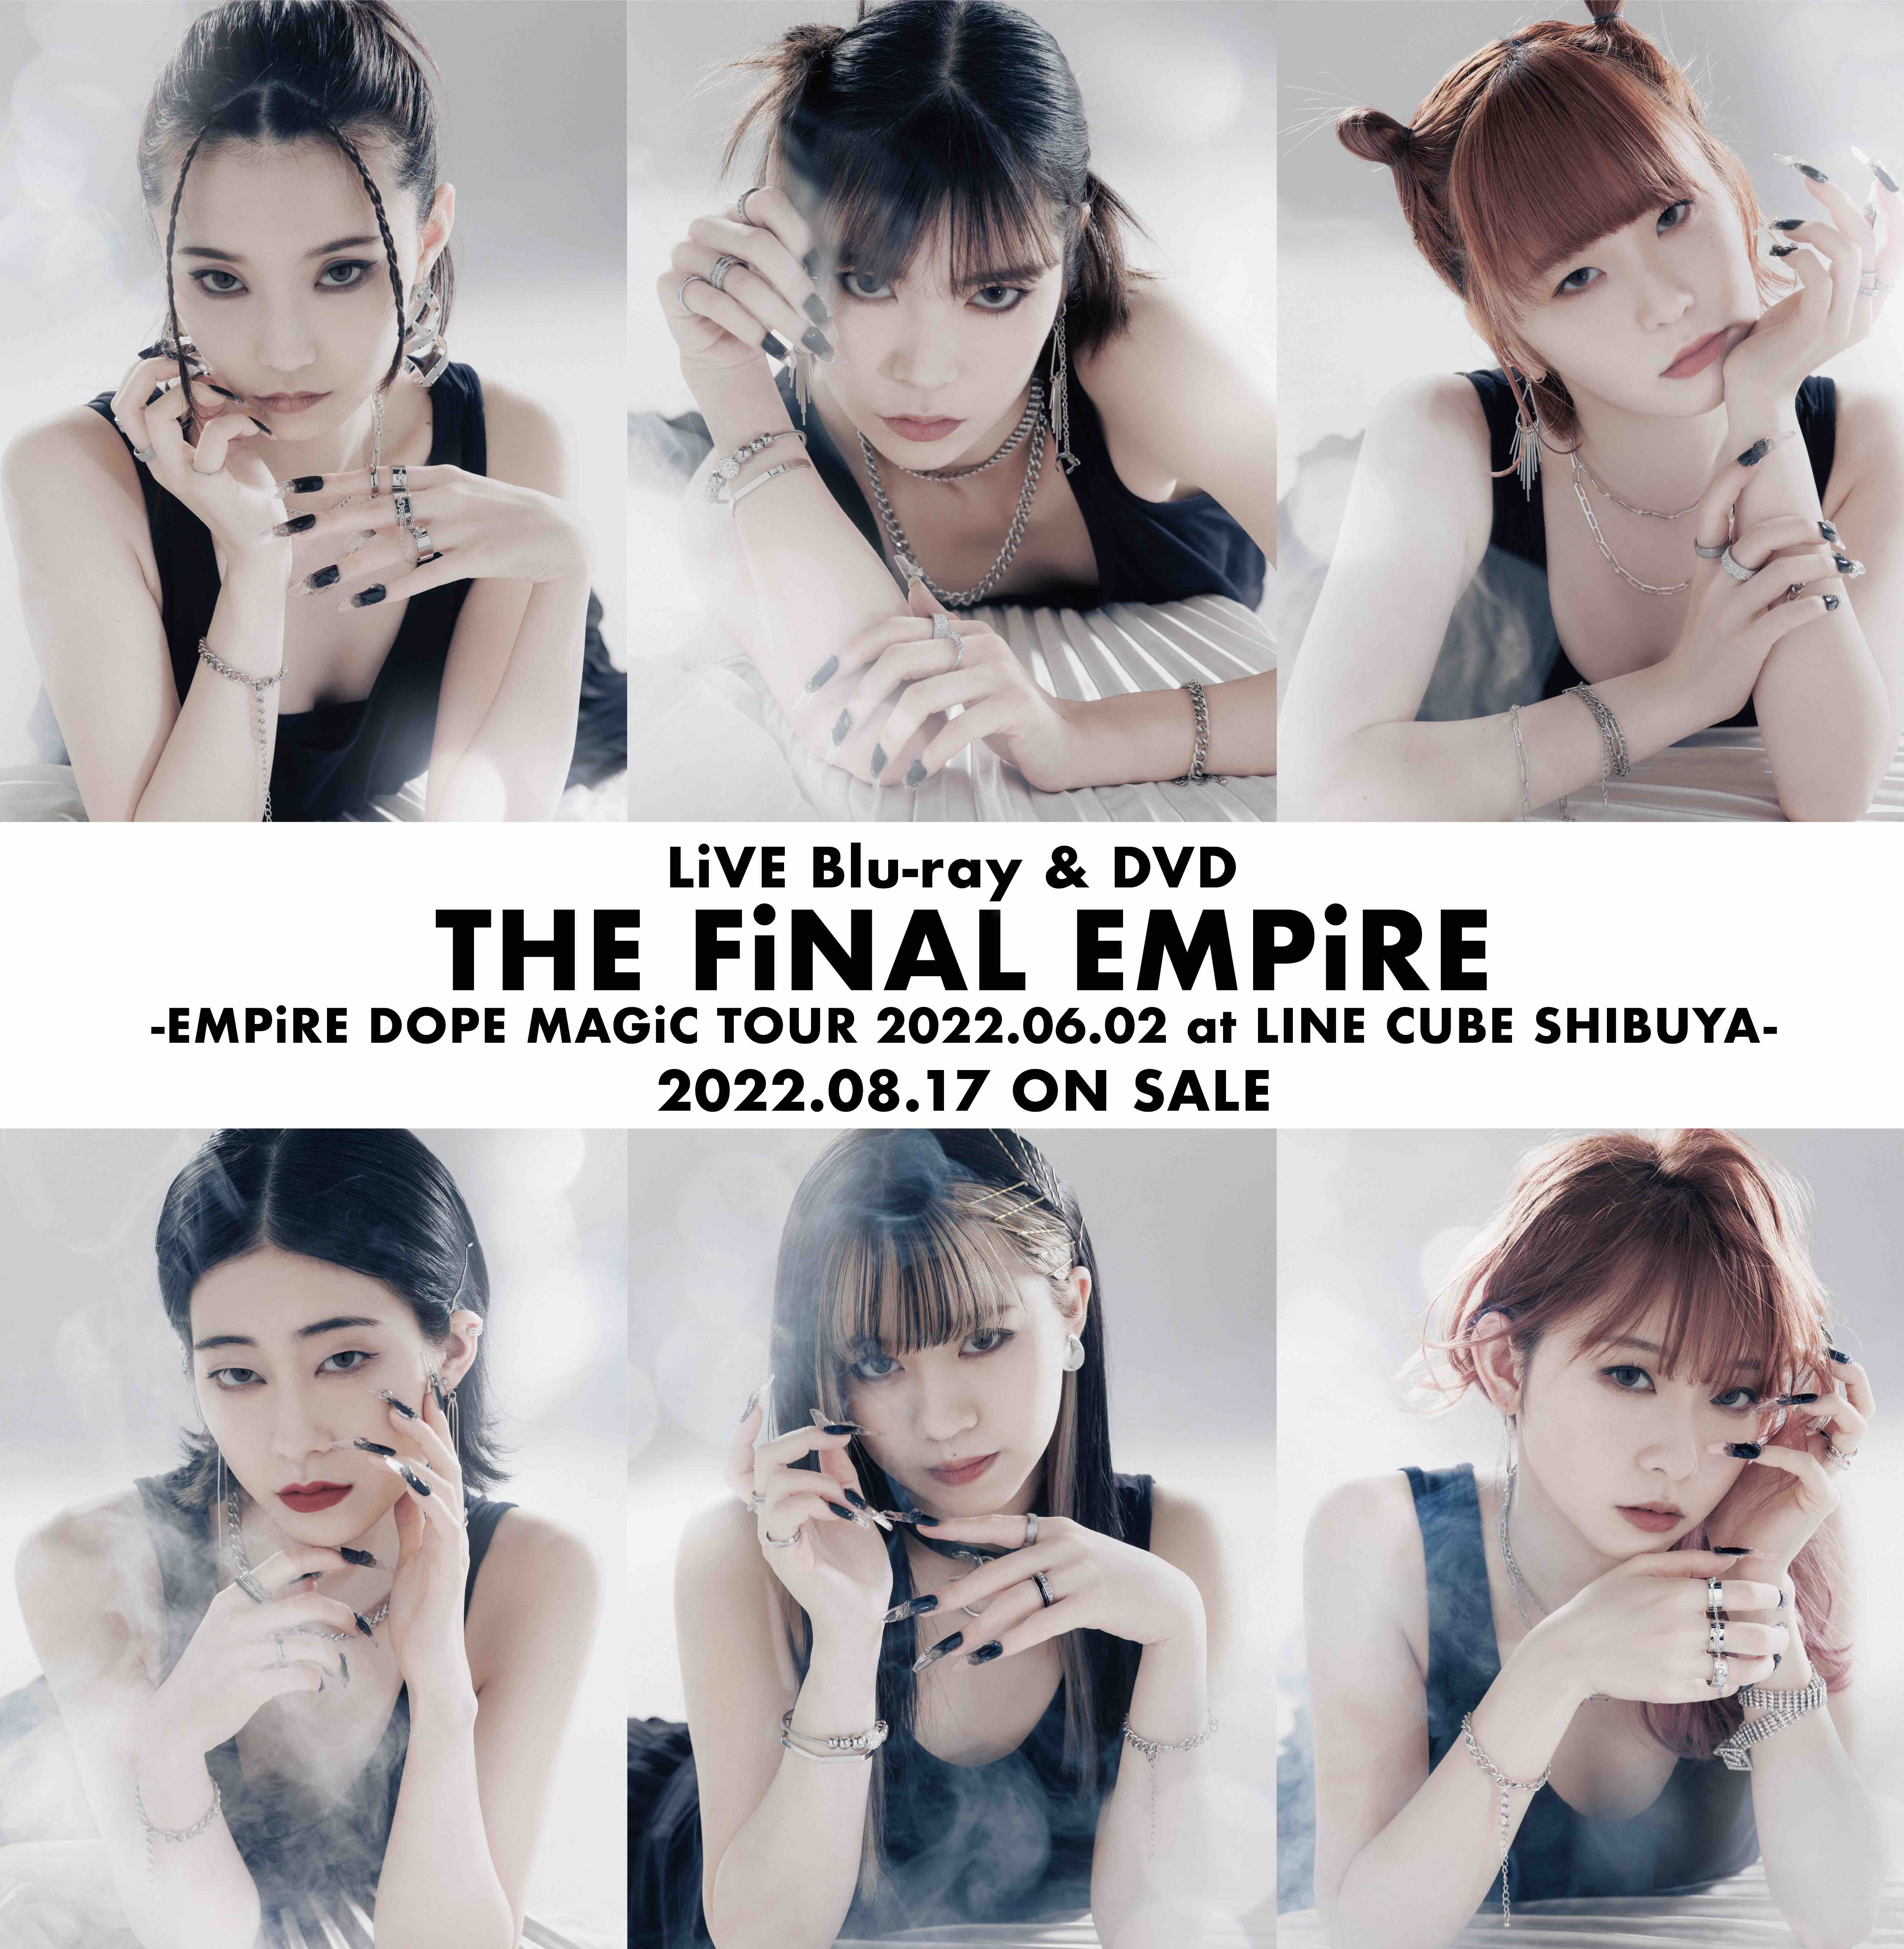 THE FiNAL EMPiRE -EMPiRE DOPE MAGiC TOUR 2022.06.02 at LINE CUBE